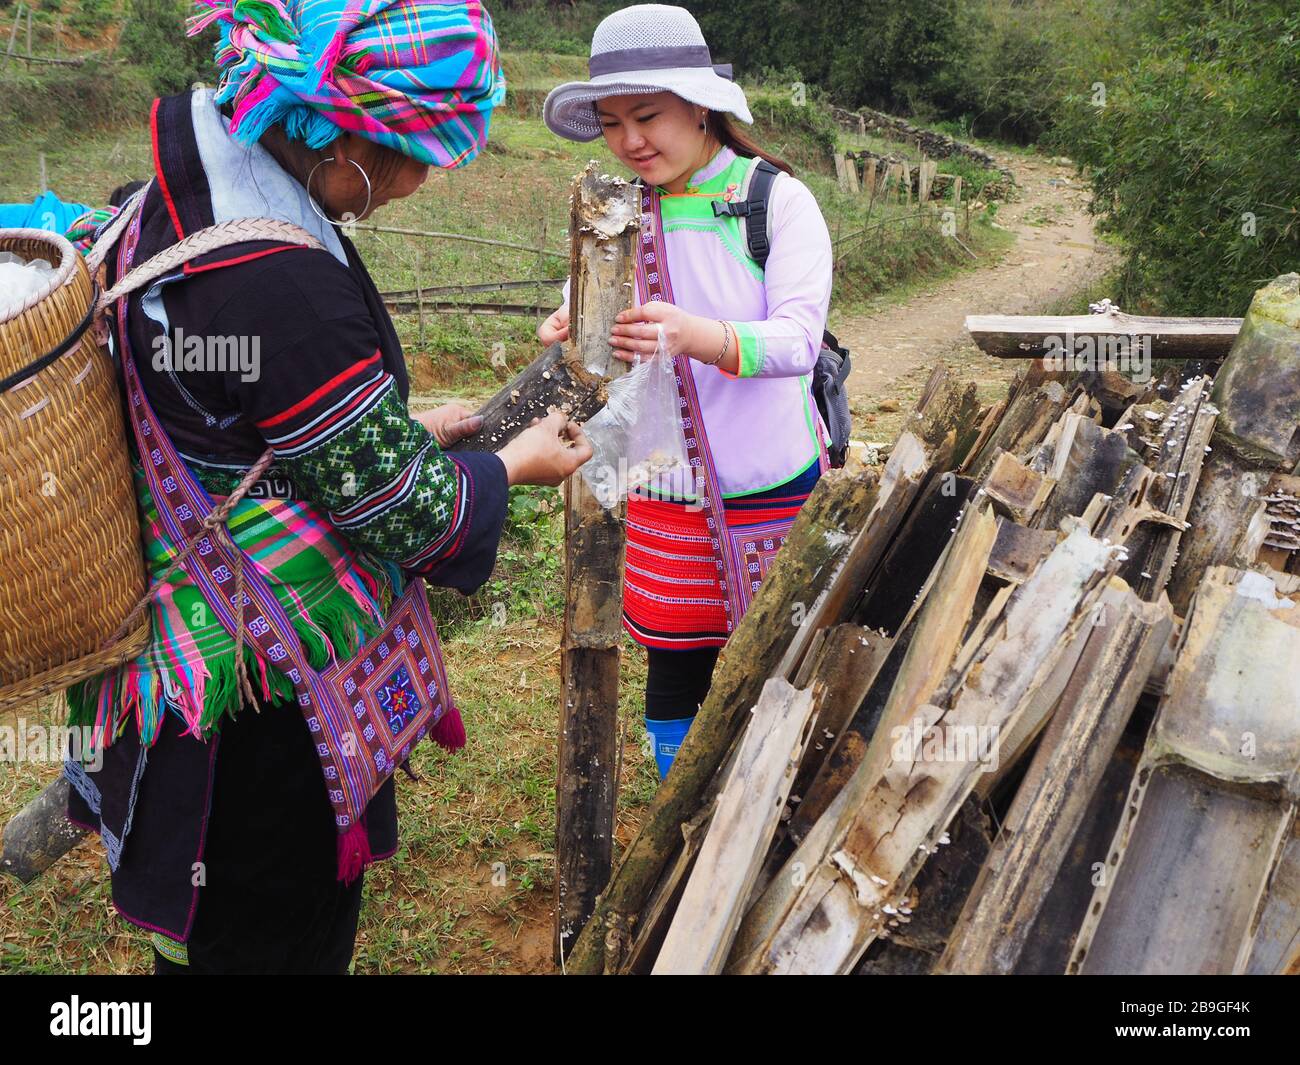 Trekking with the Sapa Sisters. Two traditional Hmong woman collecting mushrooms for dinner, Sapa, Vietnam 2020 Stock Photo